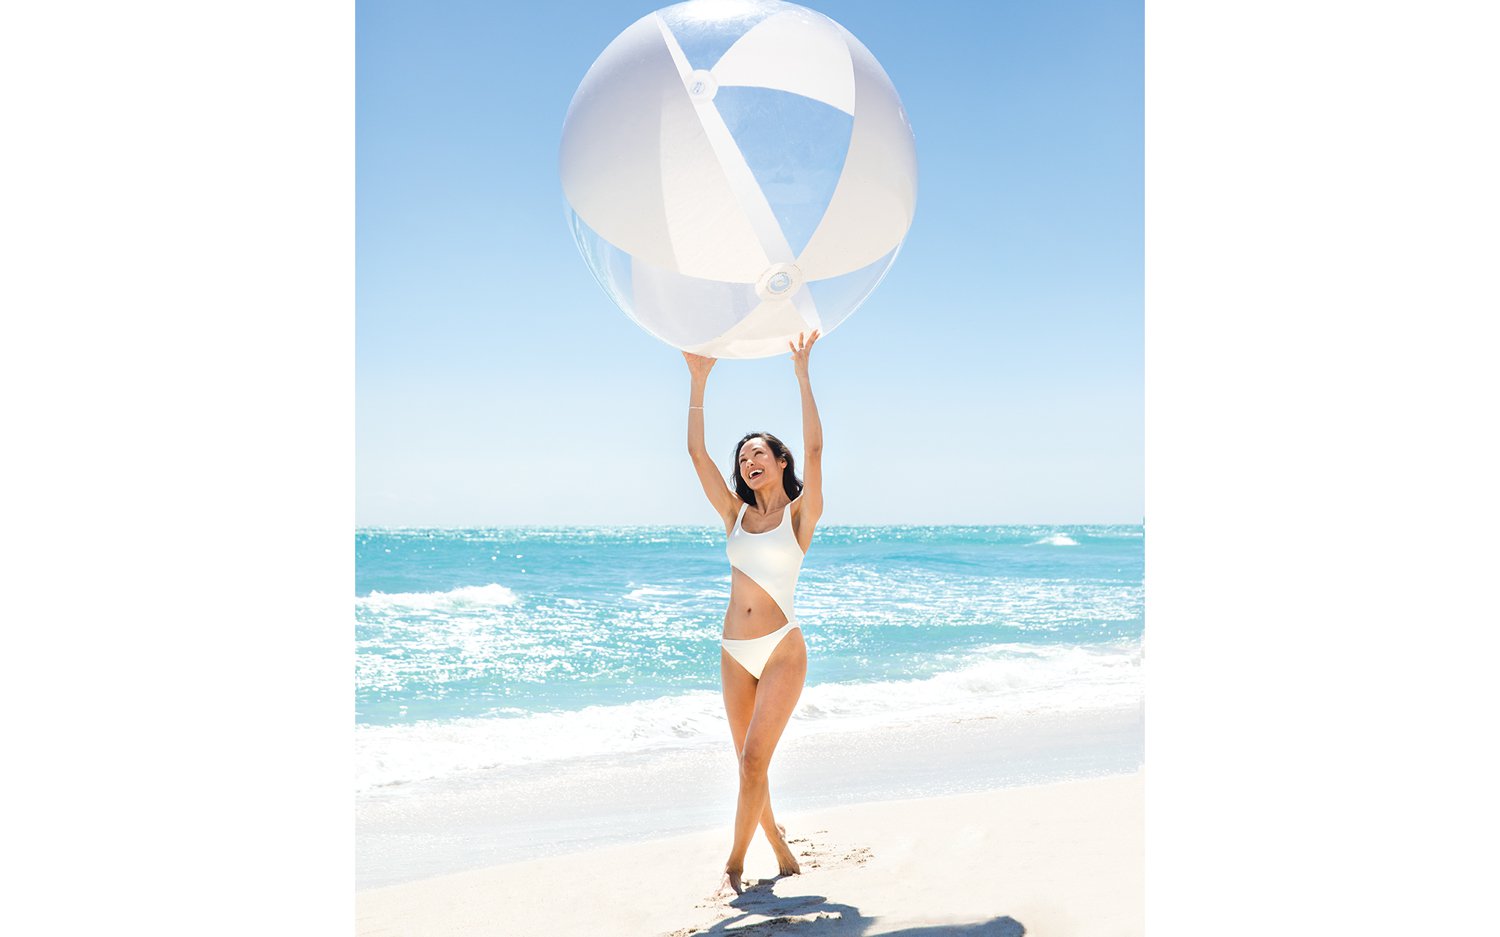 Jacober Creative Brand Identity for The Town of Surfside - Photo woman holding a large beach ball over her head